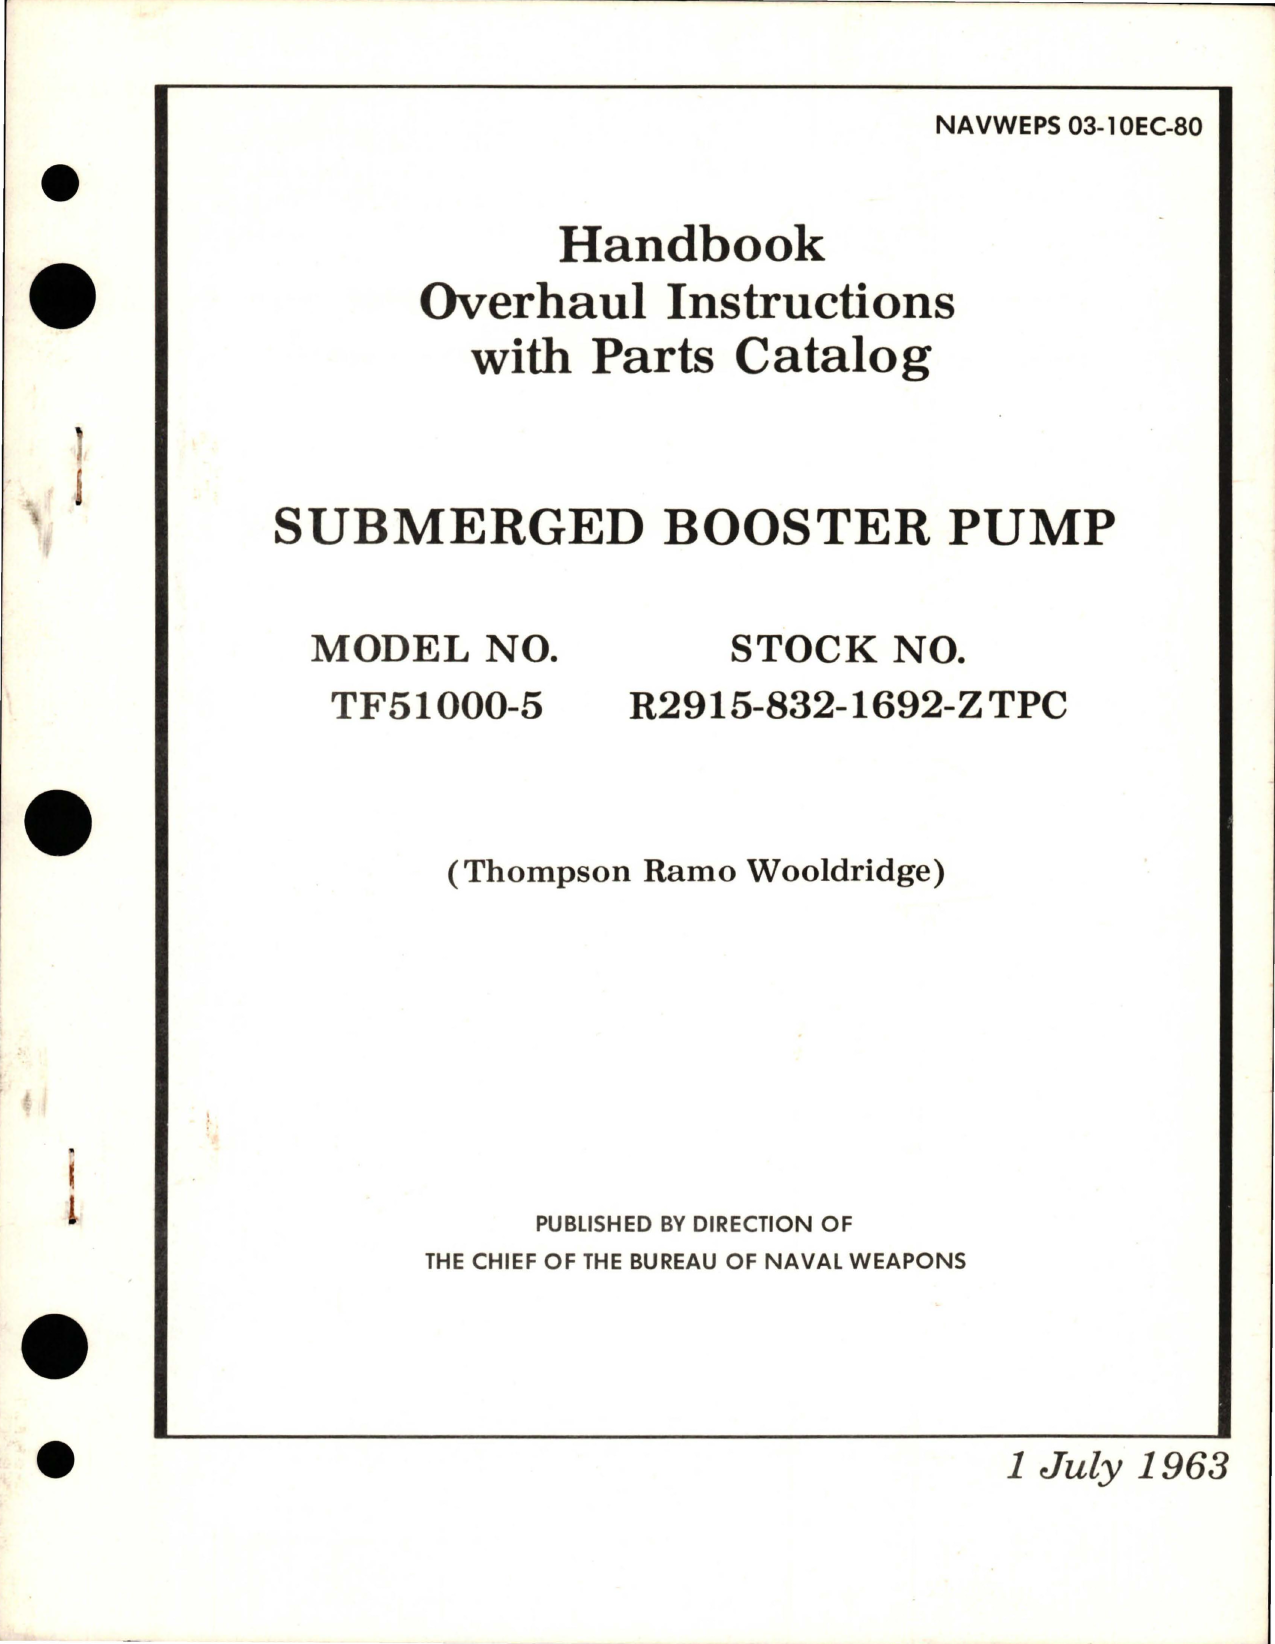 Sample page 1 from AirCorps Library document: Overhaul Instructions with Parts Catalog for Submerged Booster Pump - Model TF51000-5